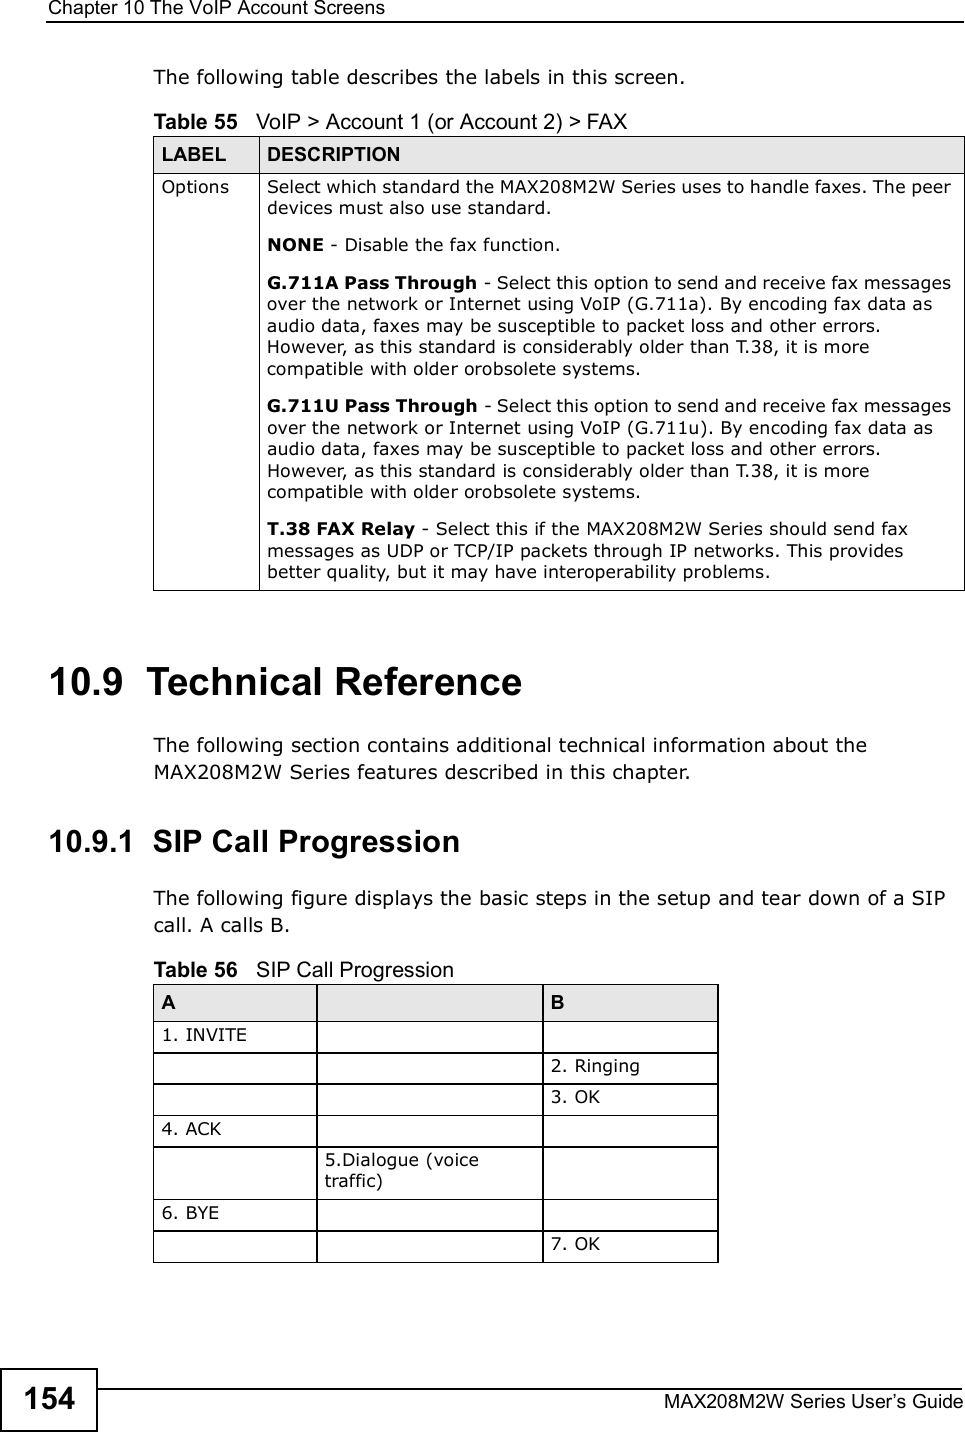 Chapter 10The VoIP Account ScreensMAX208M2W Series User s Guide154The following table describes the labels in this screen.10.9  Technical ReferenceThe following section contains additional technical information about the MAX208M2W Series features described in this chapter.10.9.1  SIP Call ProgressionThe following figure displays the basic steps in the setup and tear down of a SIP call. A calls B. Table 55   VoIP &gt; Account 1 (or Account 2) &gt; FAXLABEL DESCRIPTIONOptions Select which standard the MAX208M2W Series uses to handle faxes. The peer devices must also use standard.NONE - Disable the fax function.G.711A Pass Through - Select this option to send and receive fax messages over the network or Internet using VoIP (G.711a). By encoding fax data as audio data, faxes may be susceptible to packet loss and other errors. However, as this standard is considerably older than T.38, it is more compatible with older orobsolete systems.G.711U Pass Through - Select this option to send and receive fax messages over the network or Internet using VoIP (G.711u). By encoding fax data as audio data, faxes may be susceptible to packet loss and other errors. However, as this standard is considerably older than T.38, it is more compatible with older orobsolete systems.T.38 FAX Relay - Select this if the MAX208M2W Series should send fax messages as UDP or TCP/IP packets through IP networks. This provides better quality, but it may have interoperability problems.Table 56   SIP Call ProgressionA B1. INVITE2. Ringing3. OK4. ACK 5.Dialogue (voice traffic)6. BYE7. OK